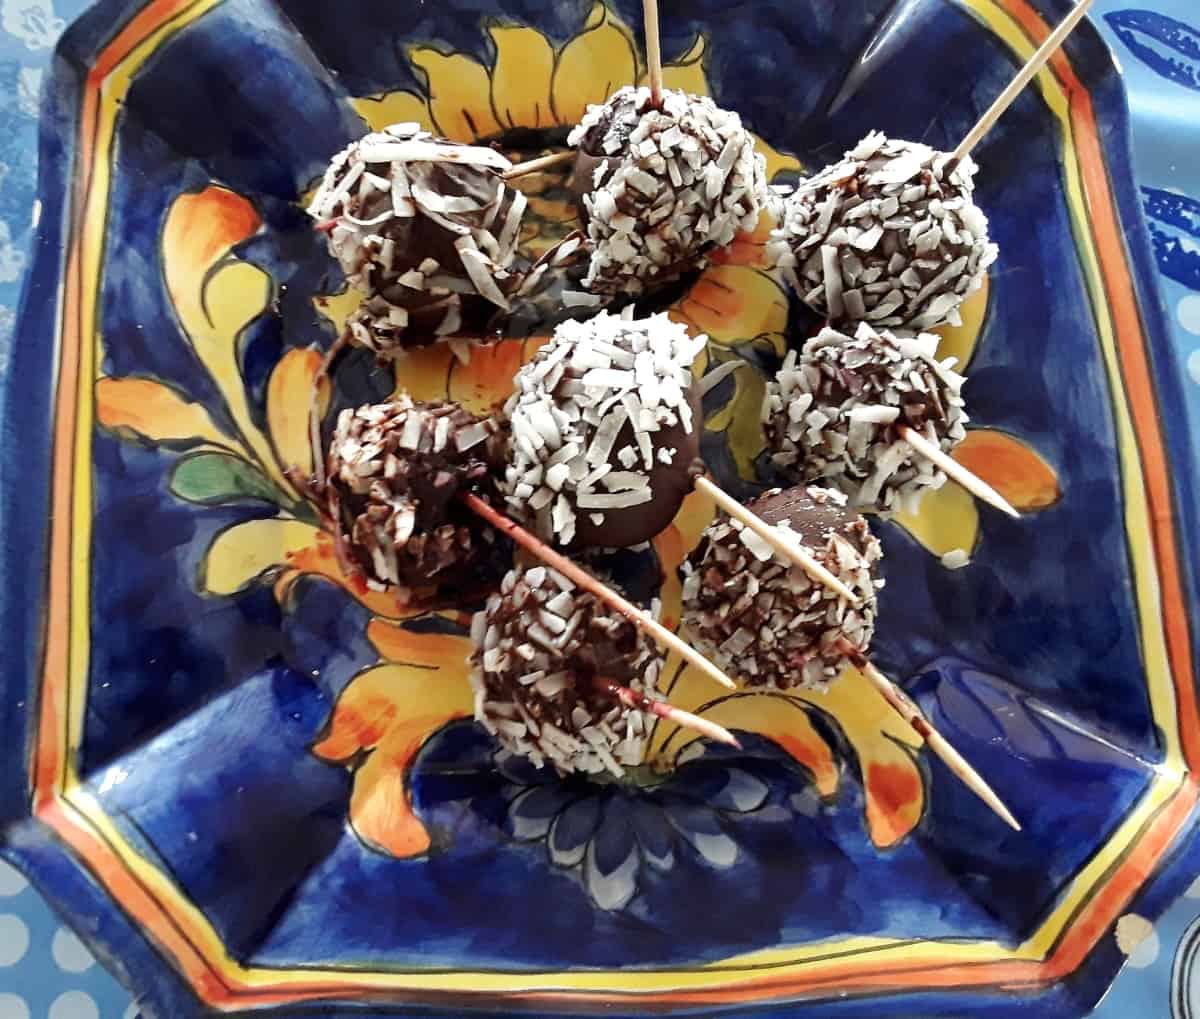 Chocolate coconut covered cherries on blue ceramic plate.